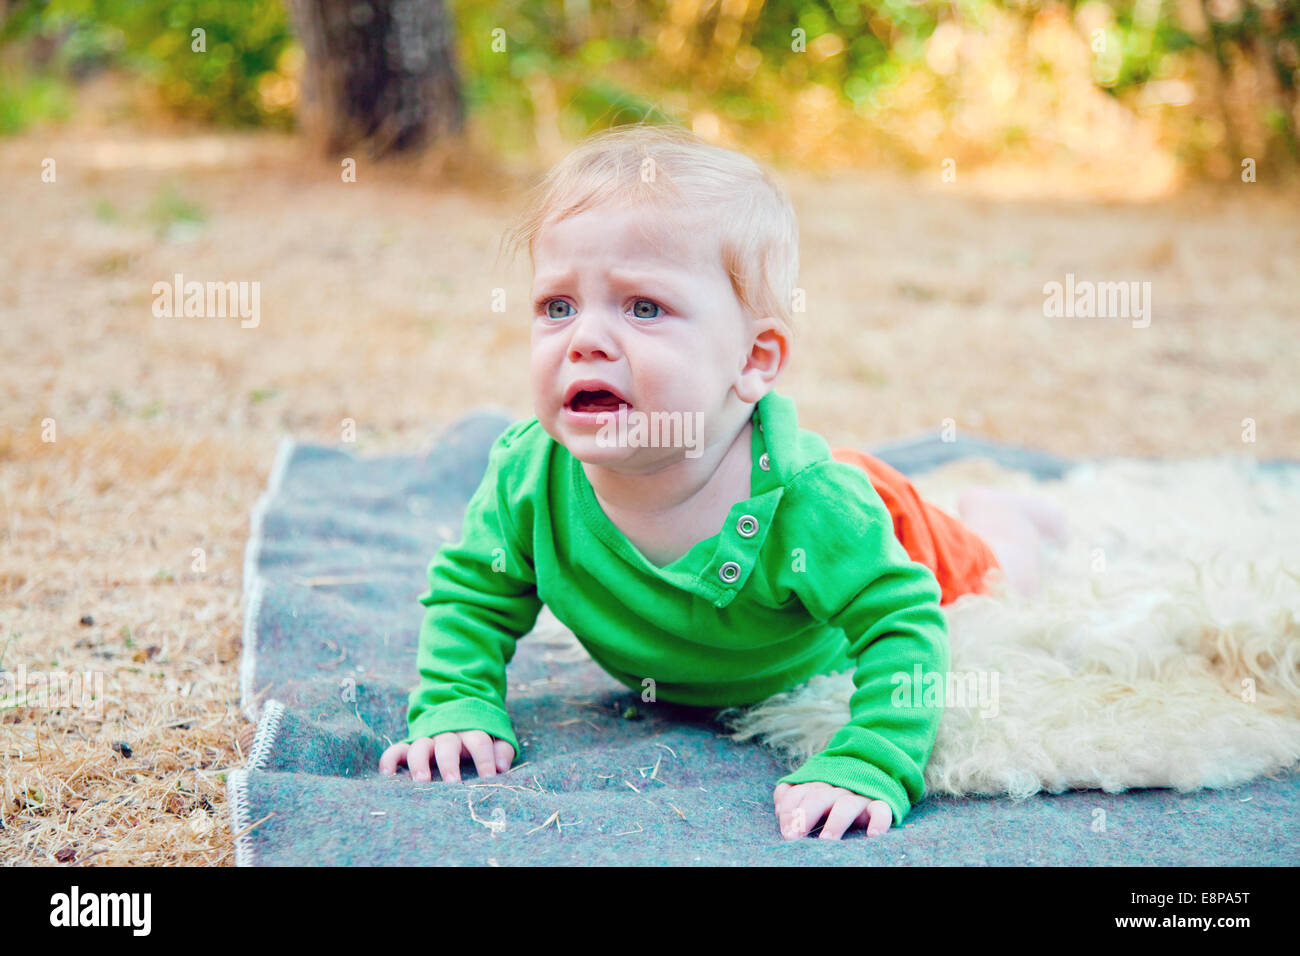 Baby boy bawling leaning on his palms while outdoors at sunset Stock Photo